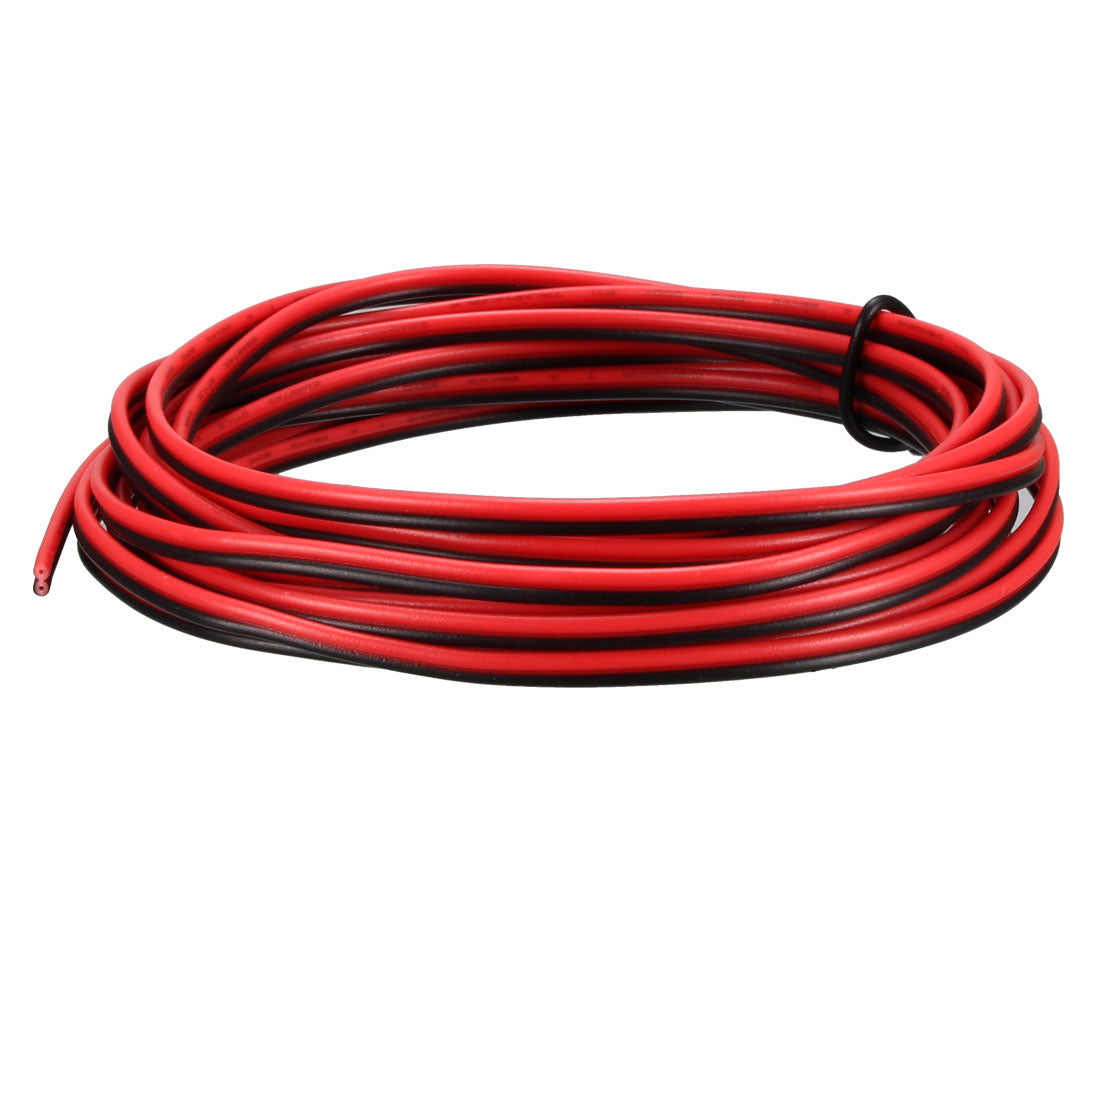 uxcell Uxcell Red Black Wire 2pin Extension Cable Cord 26 AWG Parallel Wire Tin Plated Copper 3 Meters Length for LED Strip Light